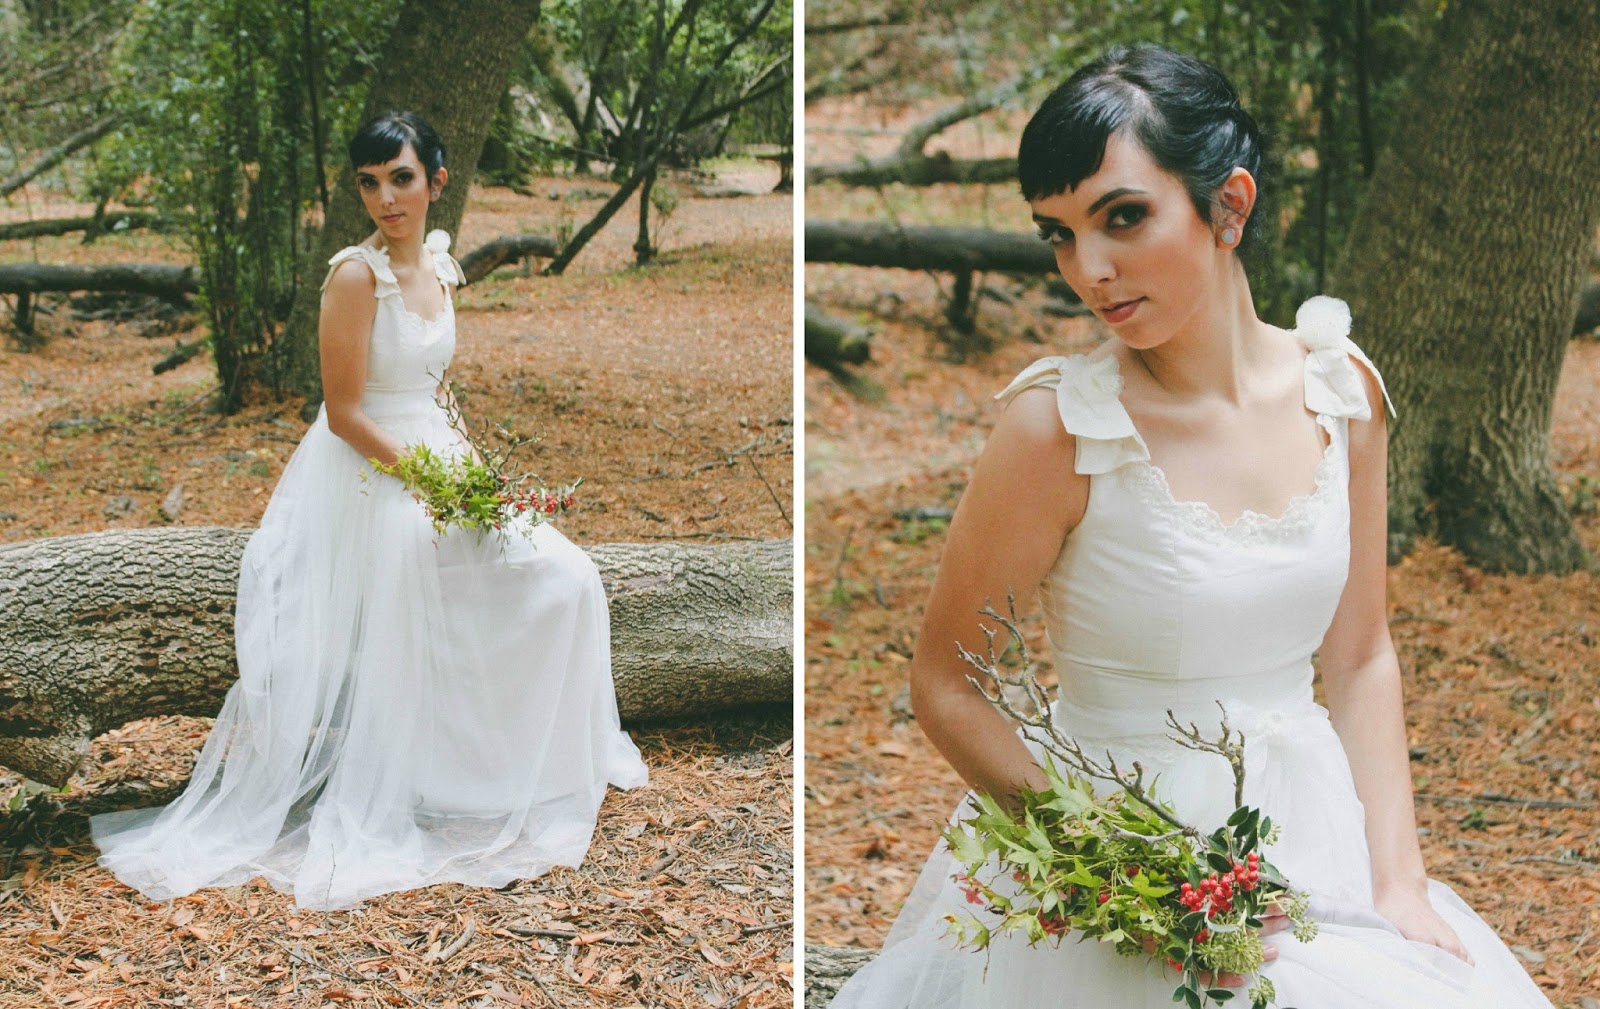 BRIDE CHIC: AUTUMN CHAMPAGNE TEA IN THE WOODS